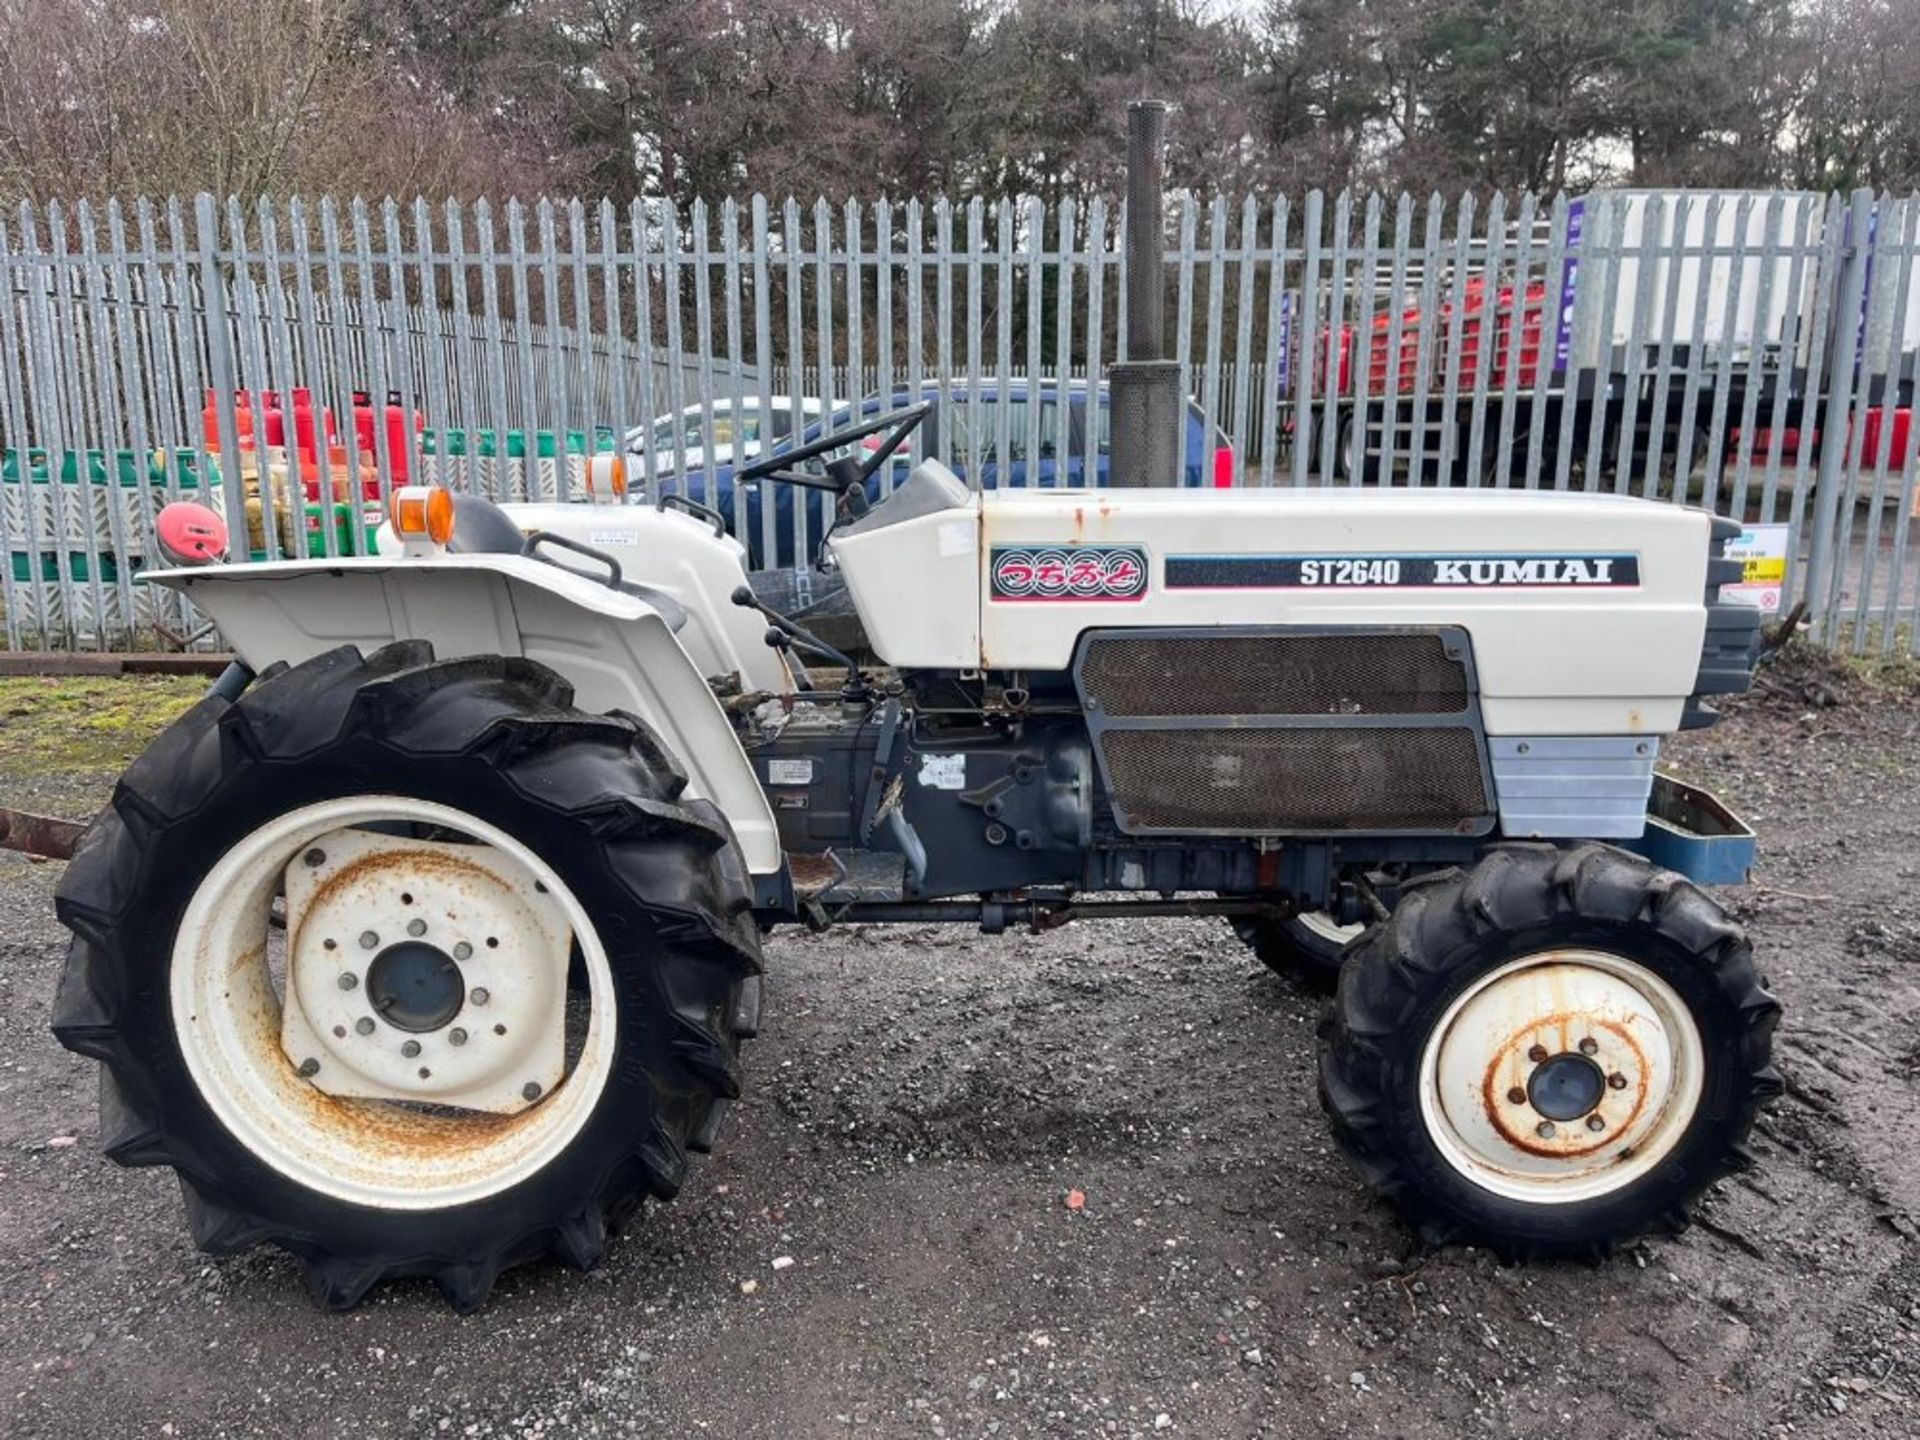 KUMIAI ST2640 4WD COMPACT TRACTOR 4 CYL DSL ENGINE R&D PTO TURNS LINK ARMS RAISE